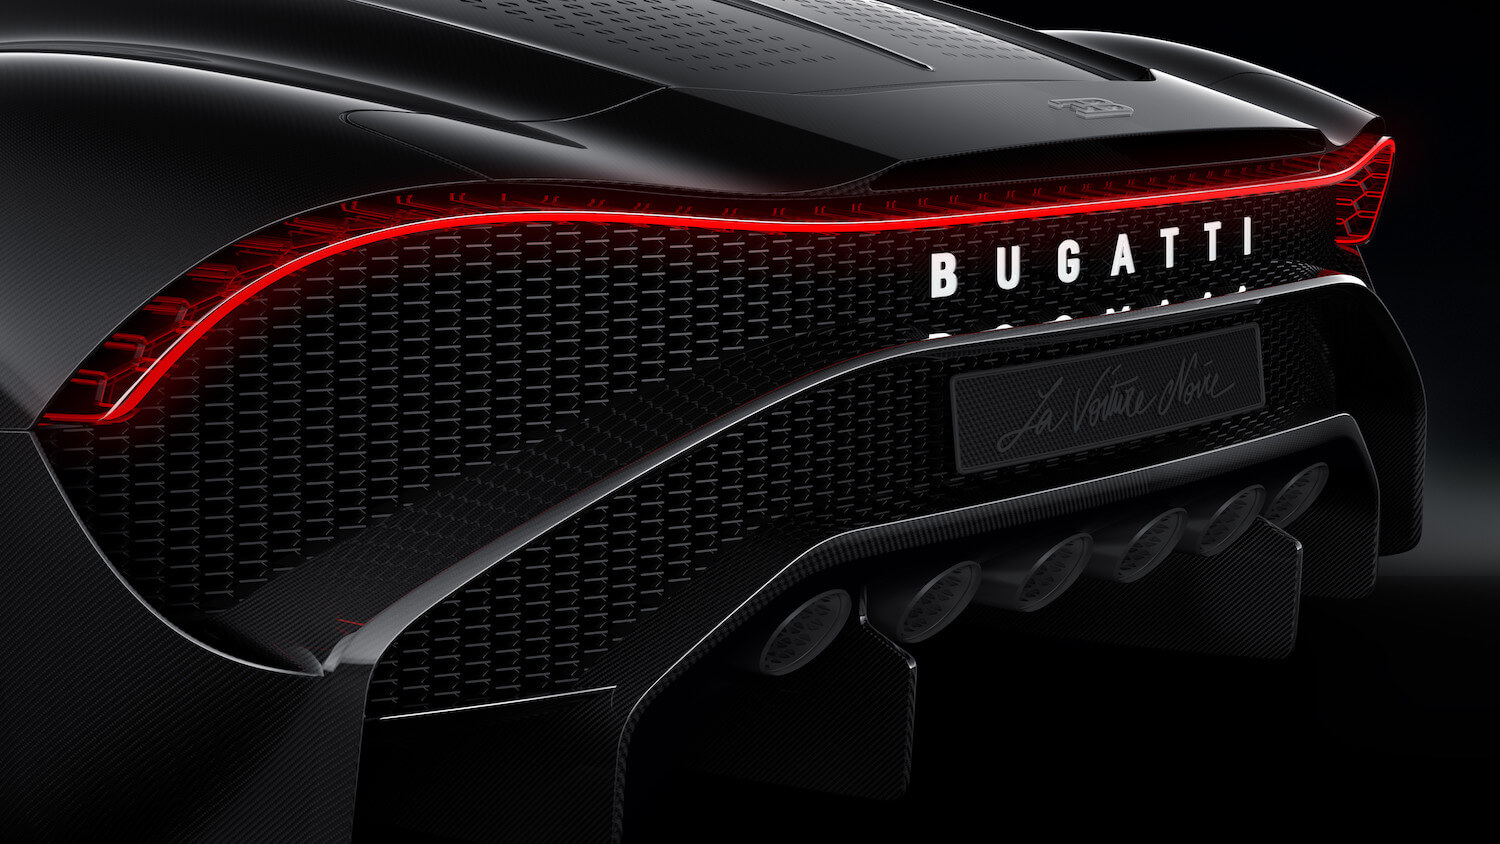 Bugatti logo in the tail light of a Chiron supercar.